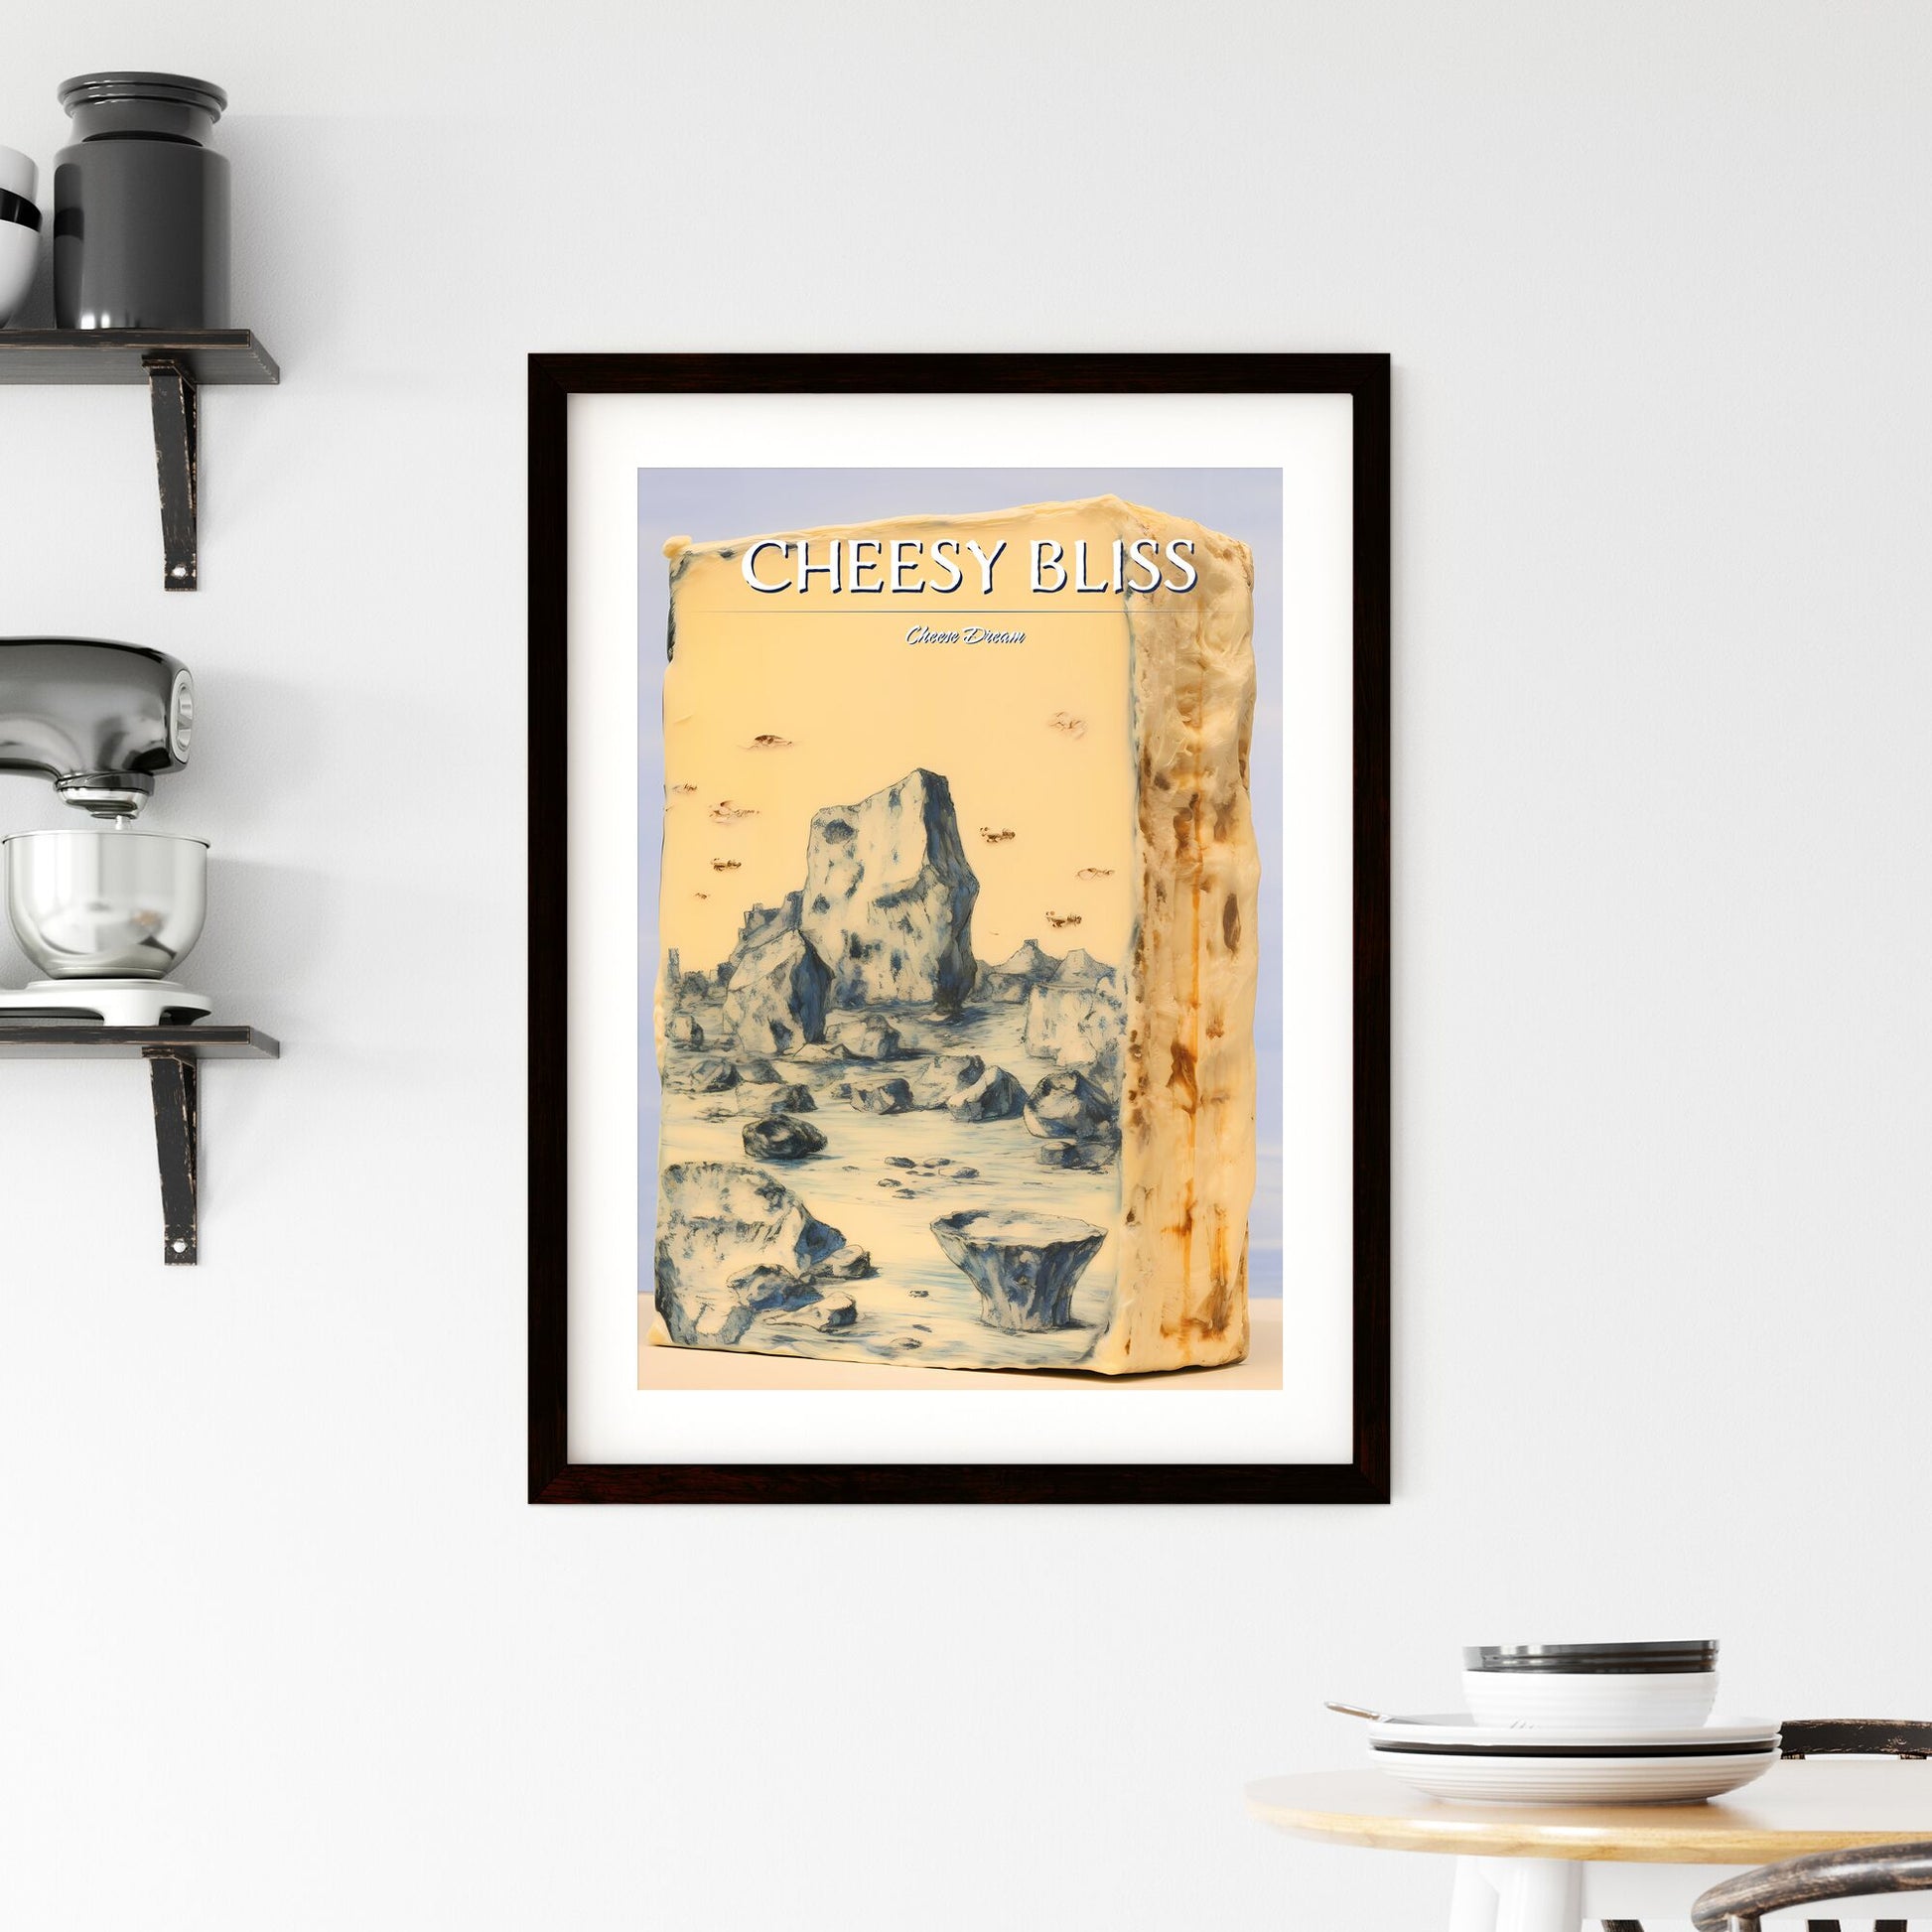 A Poster of Gorgonzola cheese on beige background sketchbook art - A Piece Of Food With A Drawing Of A Landscape Default Title